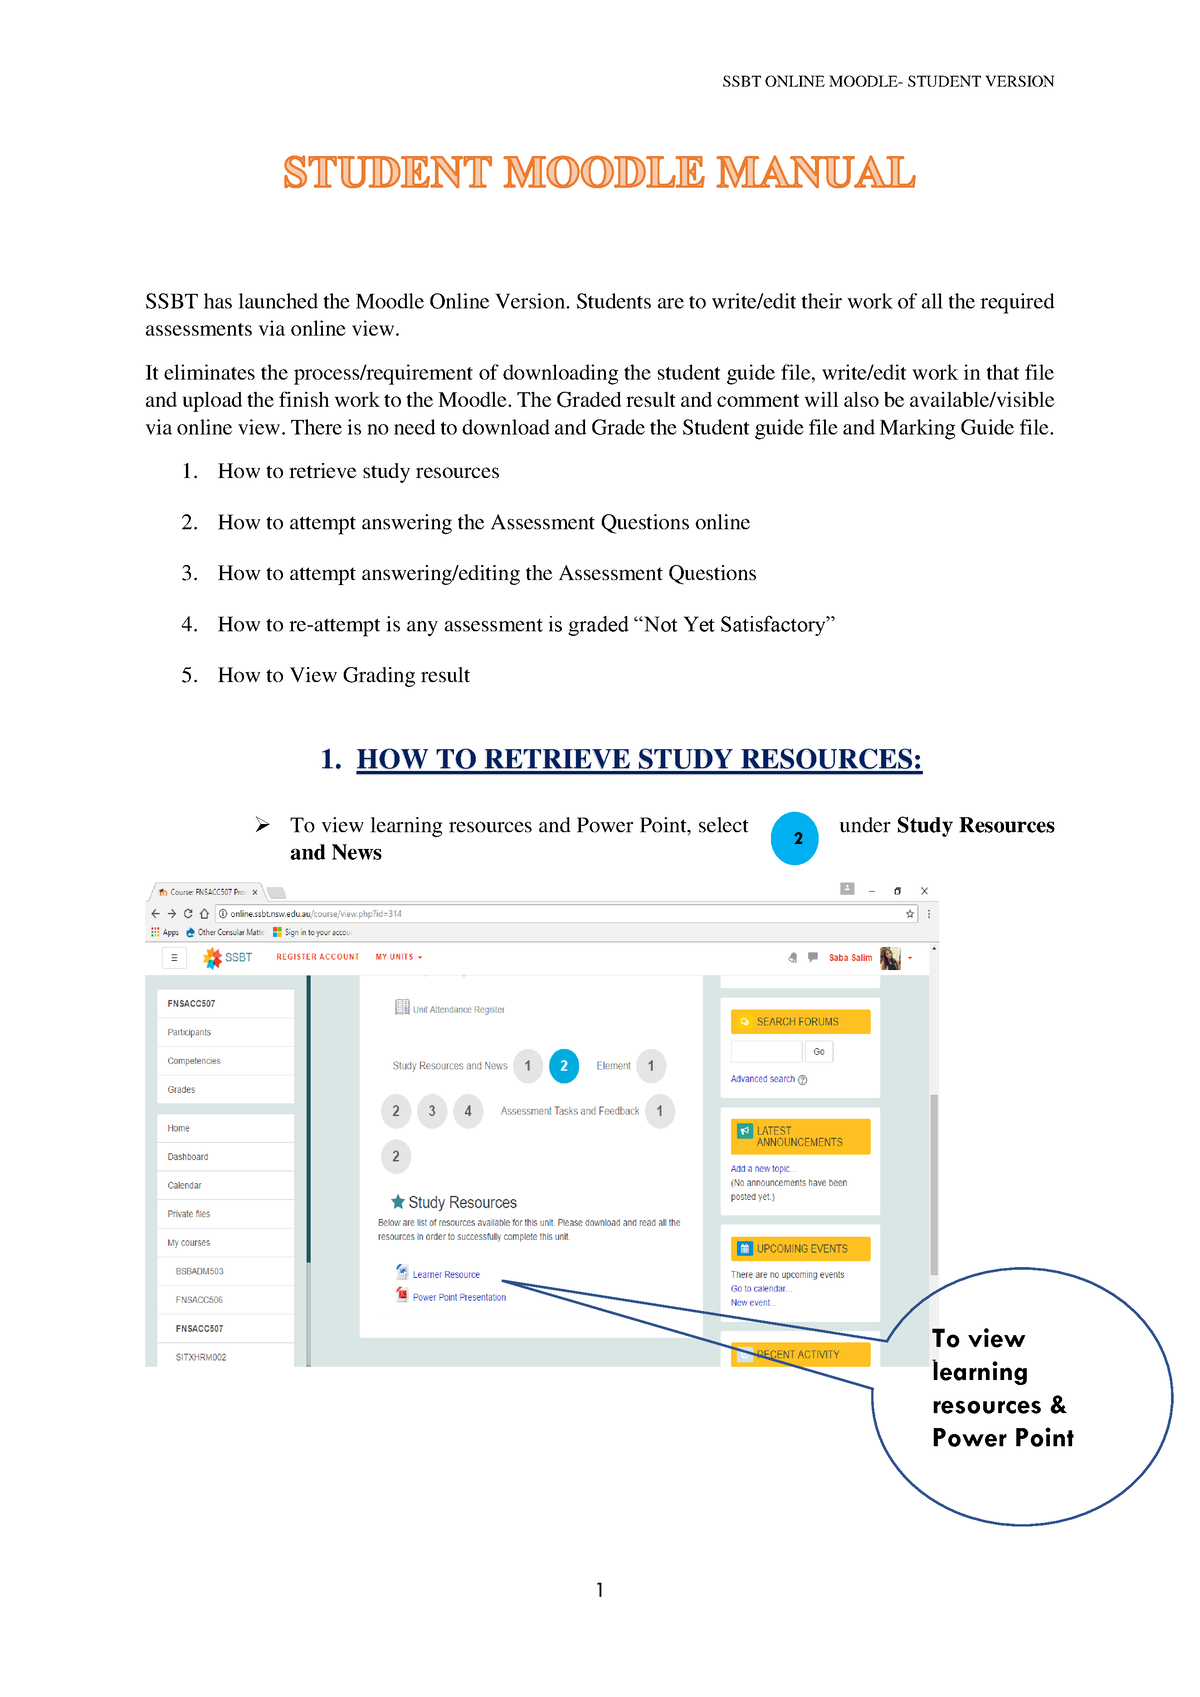 Moodle Student Manual - Online Assessment ver 2 - SSBT has launched the ...